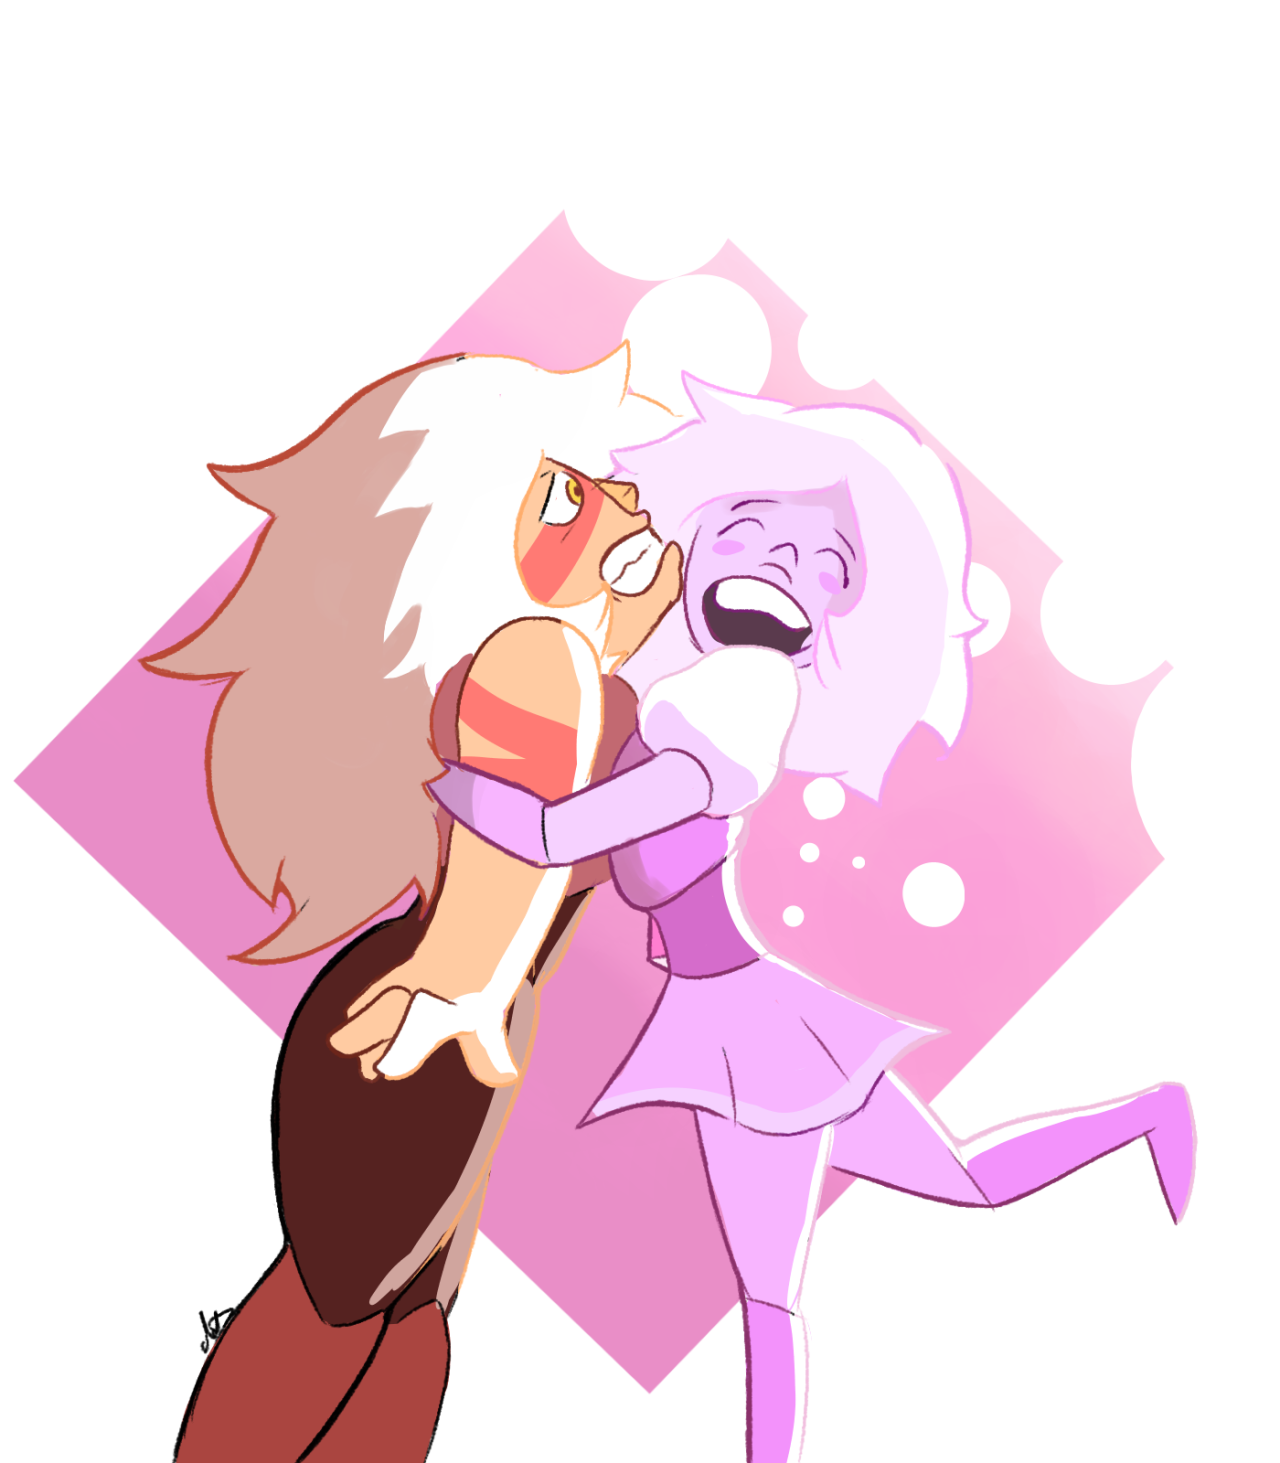 medieval-pole-dancer said: Pink Diamond and Jasper. Answer: pink diamond and her very own jasper :)